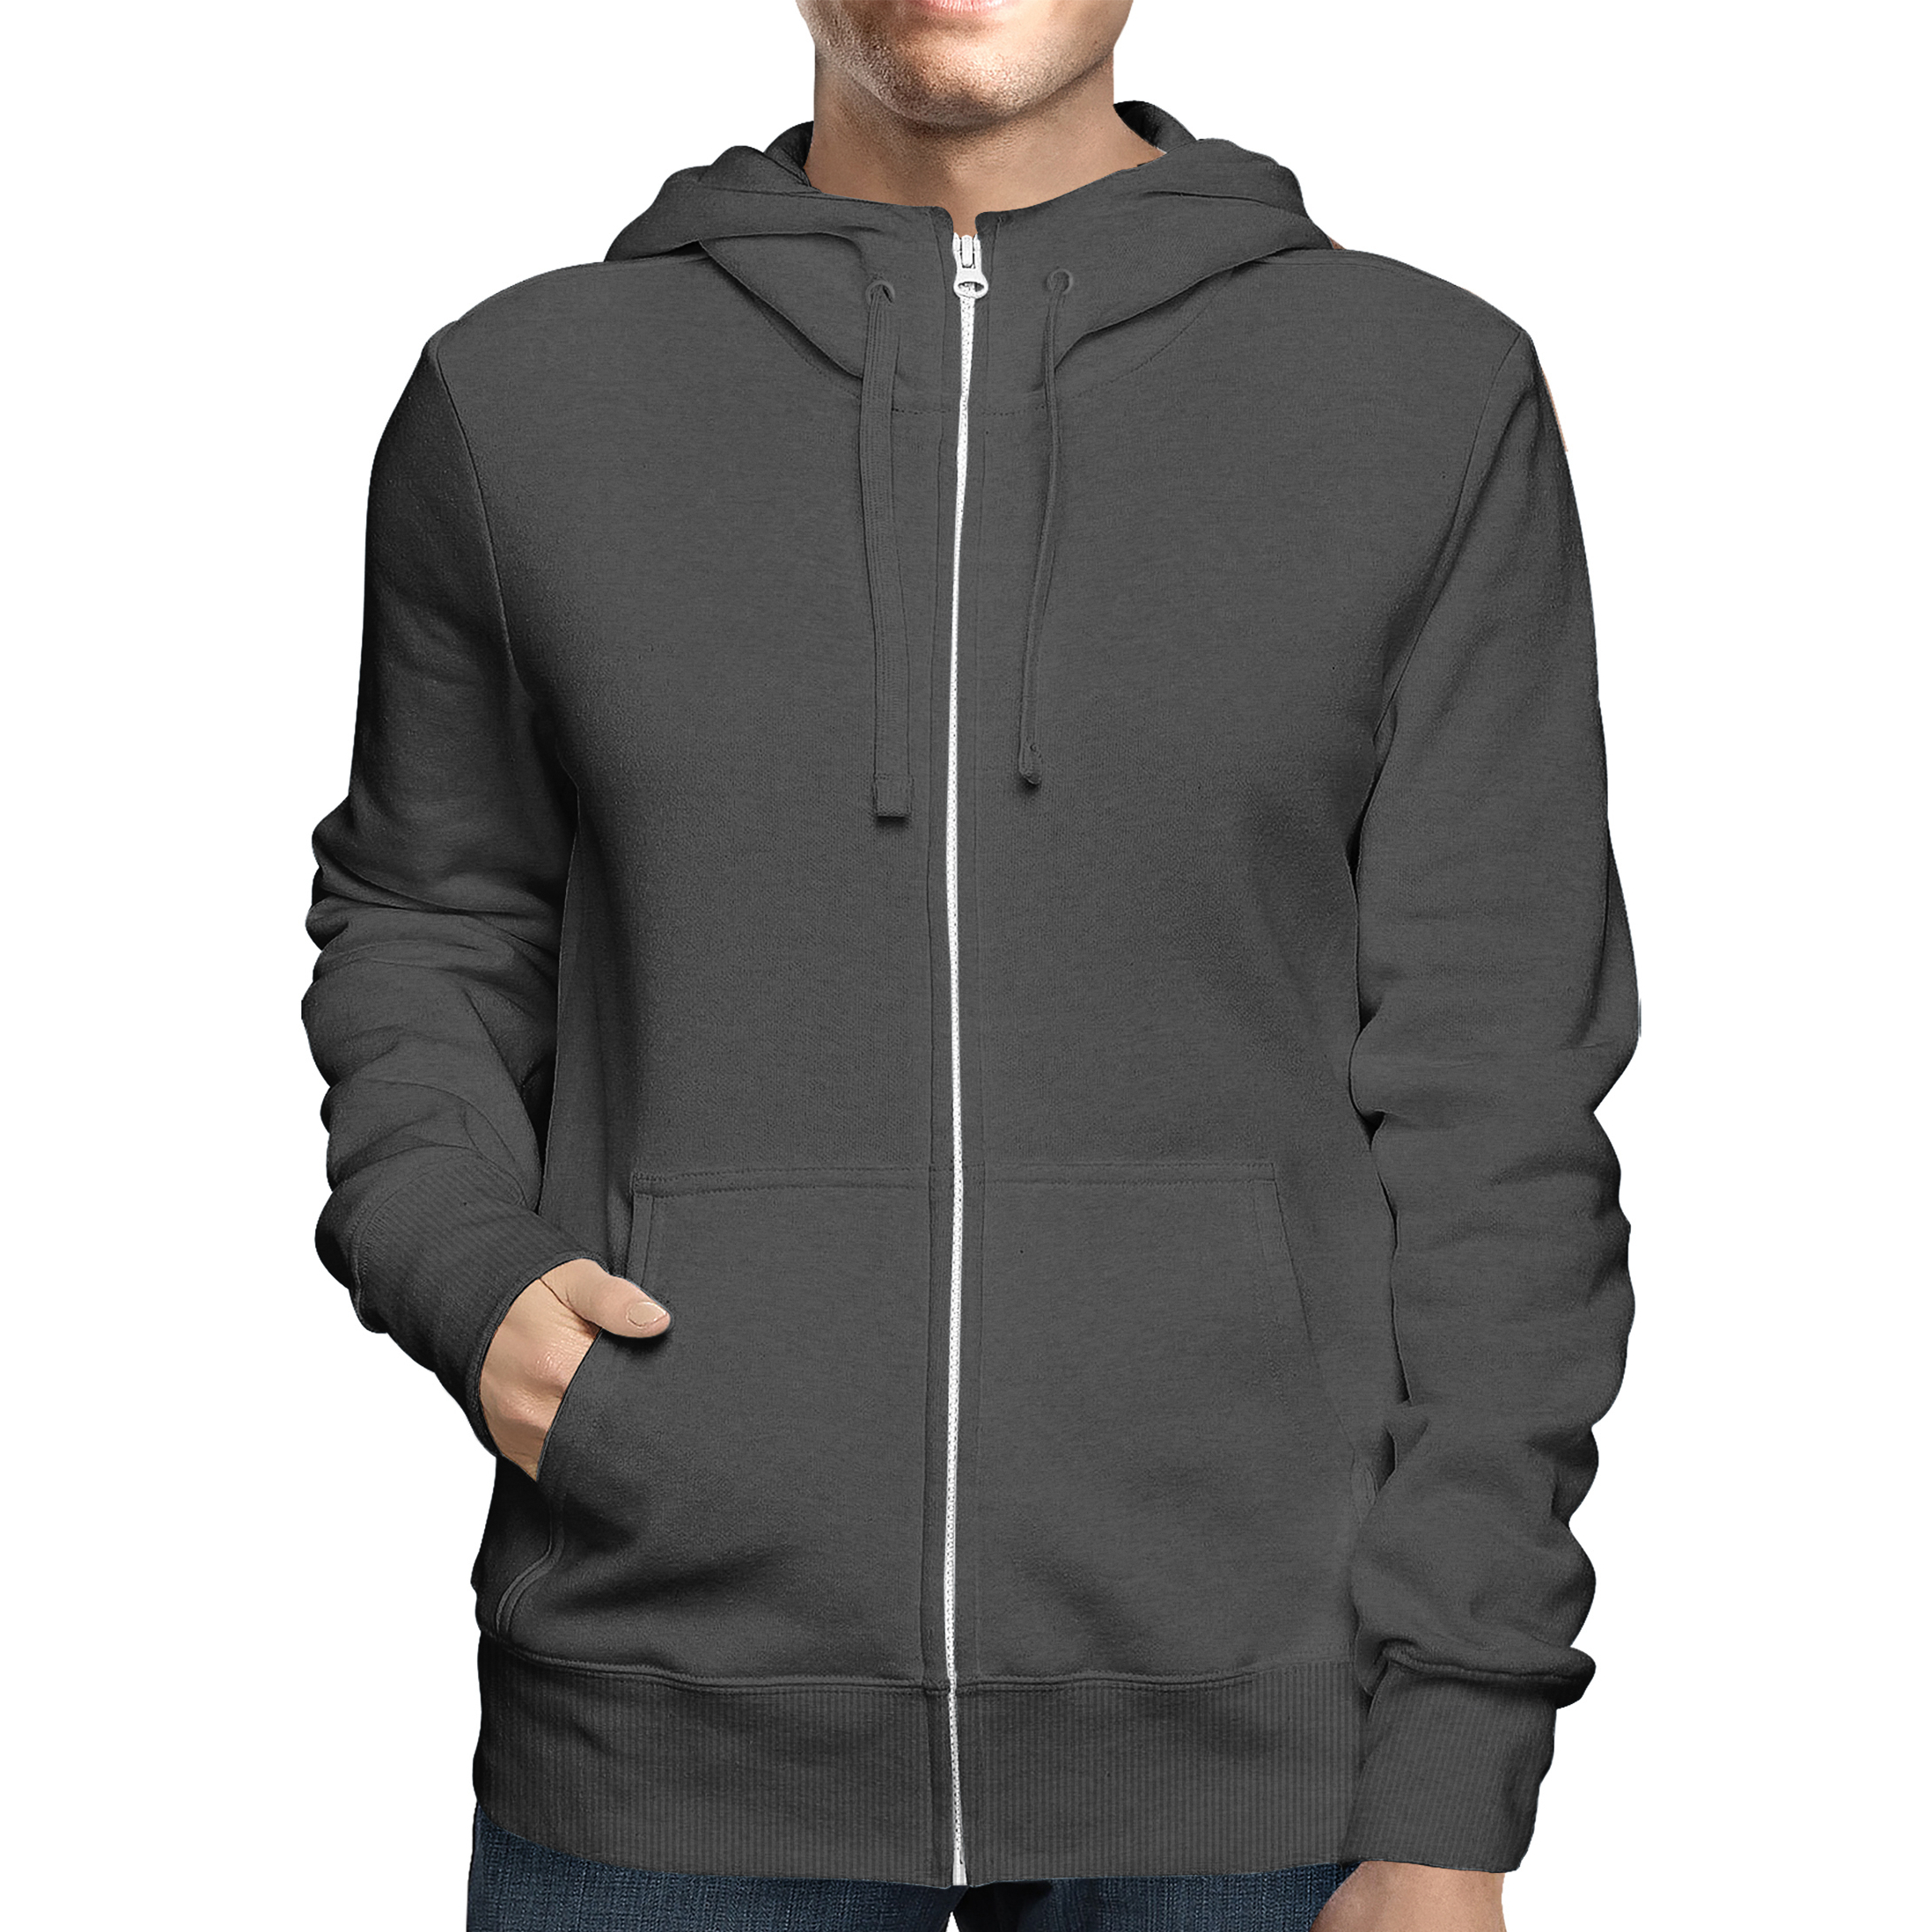 2-Pack: Men's Full Zip Up Fleece-Lined Hoodie Sweatshirt (Big & Tall Size Available) - Charcoal, 2x-large